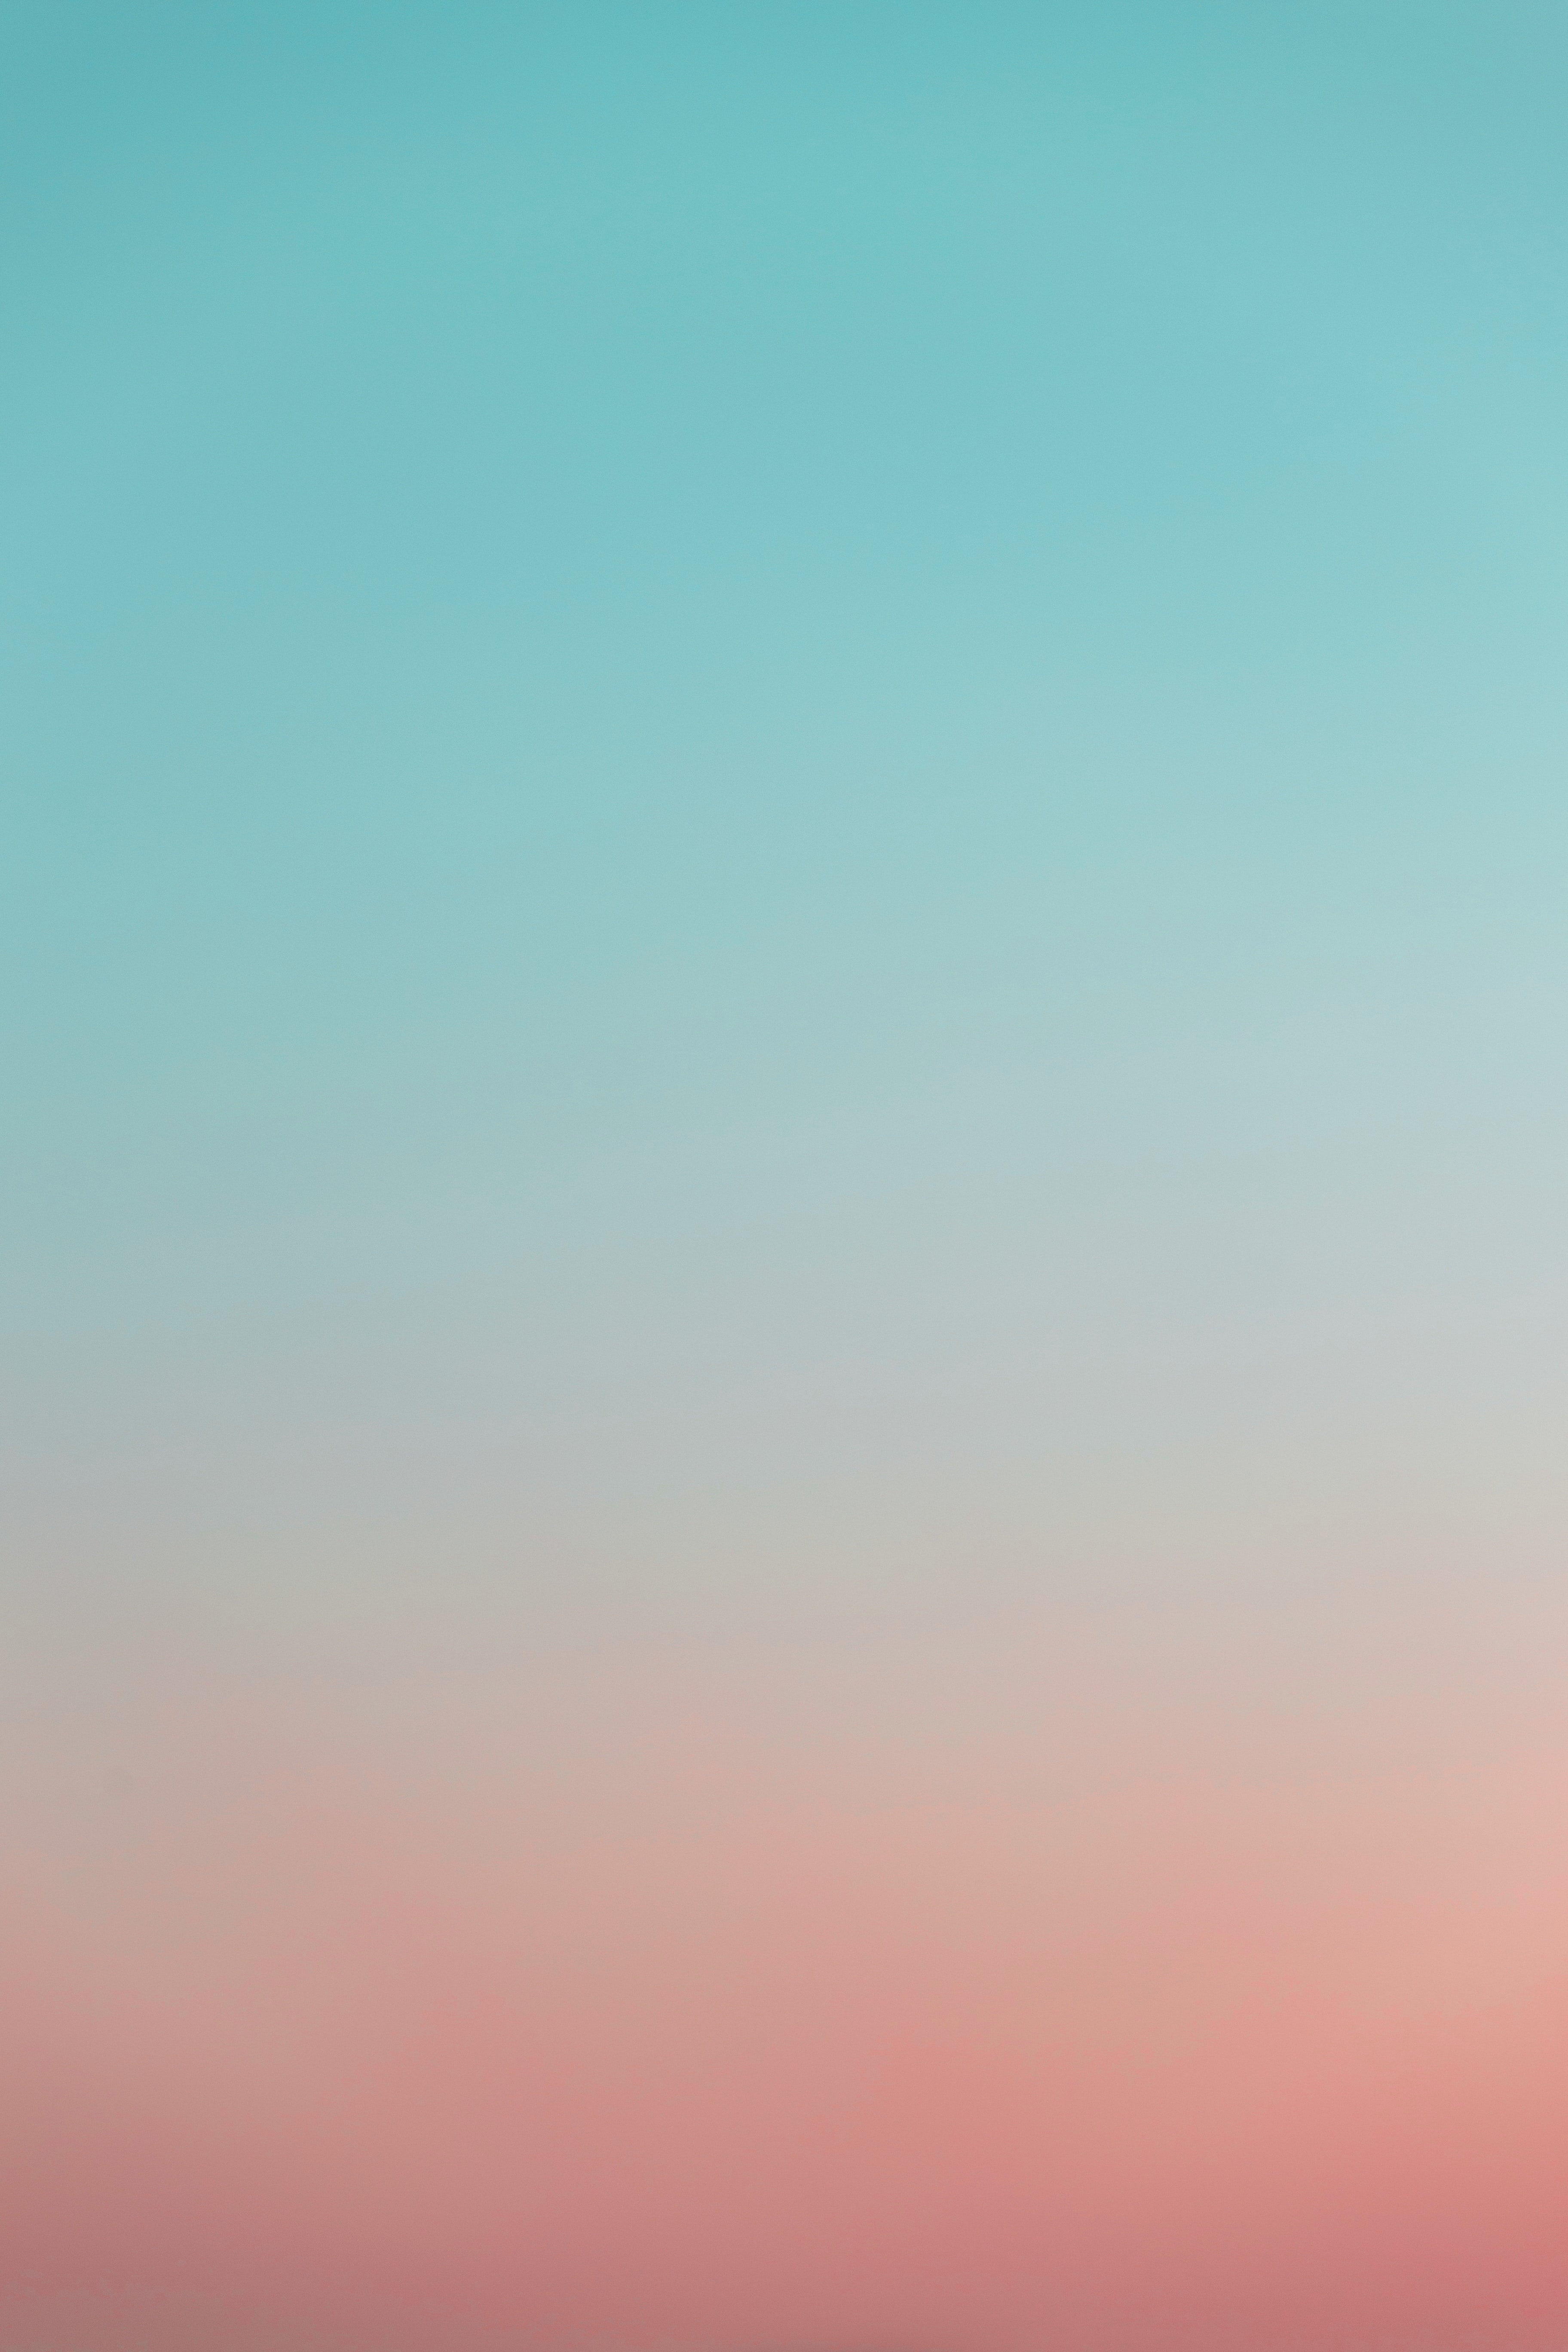 pink, abstract, blue, color, gradient wallpaper for mobile